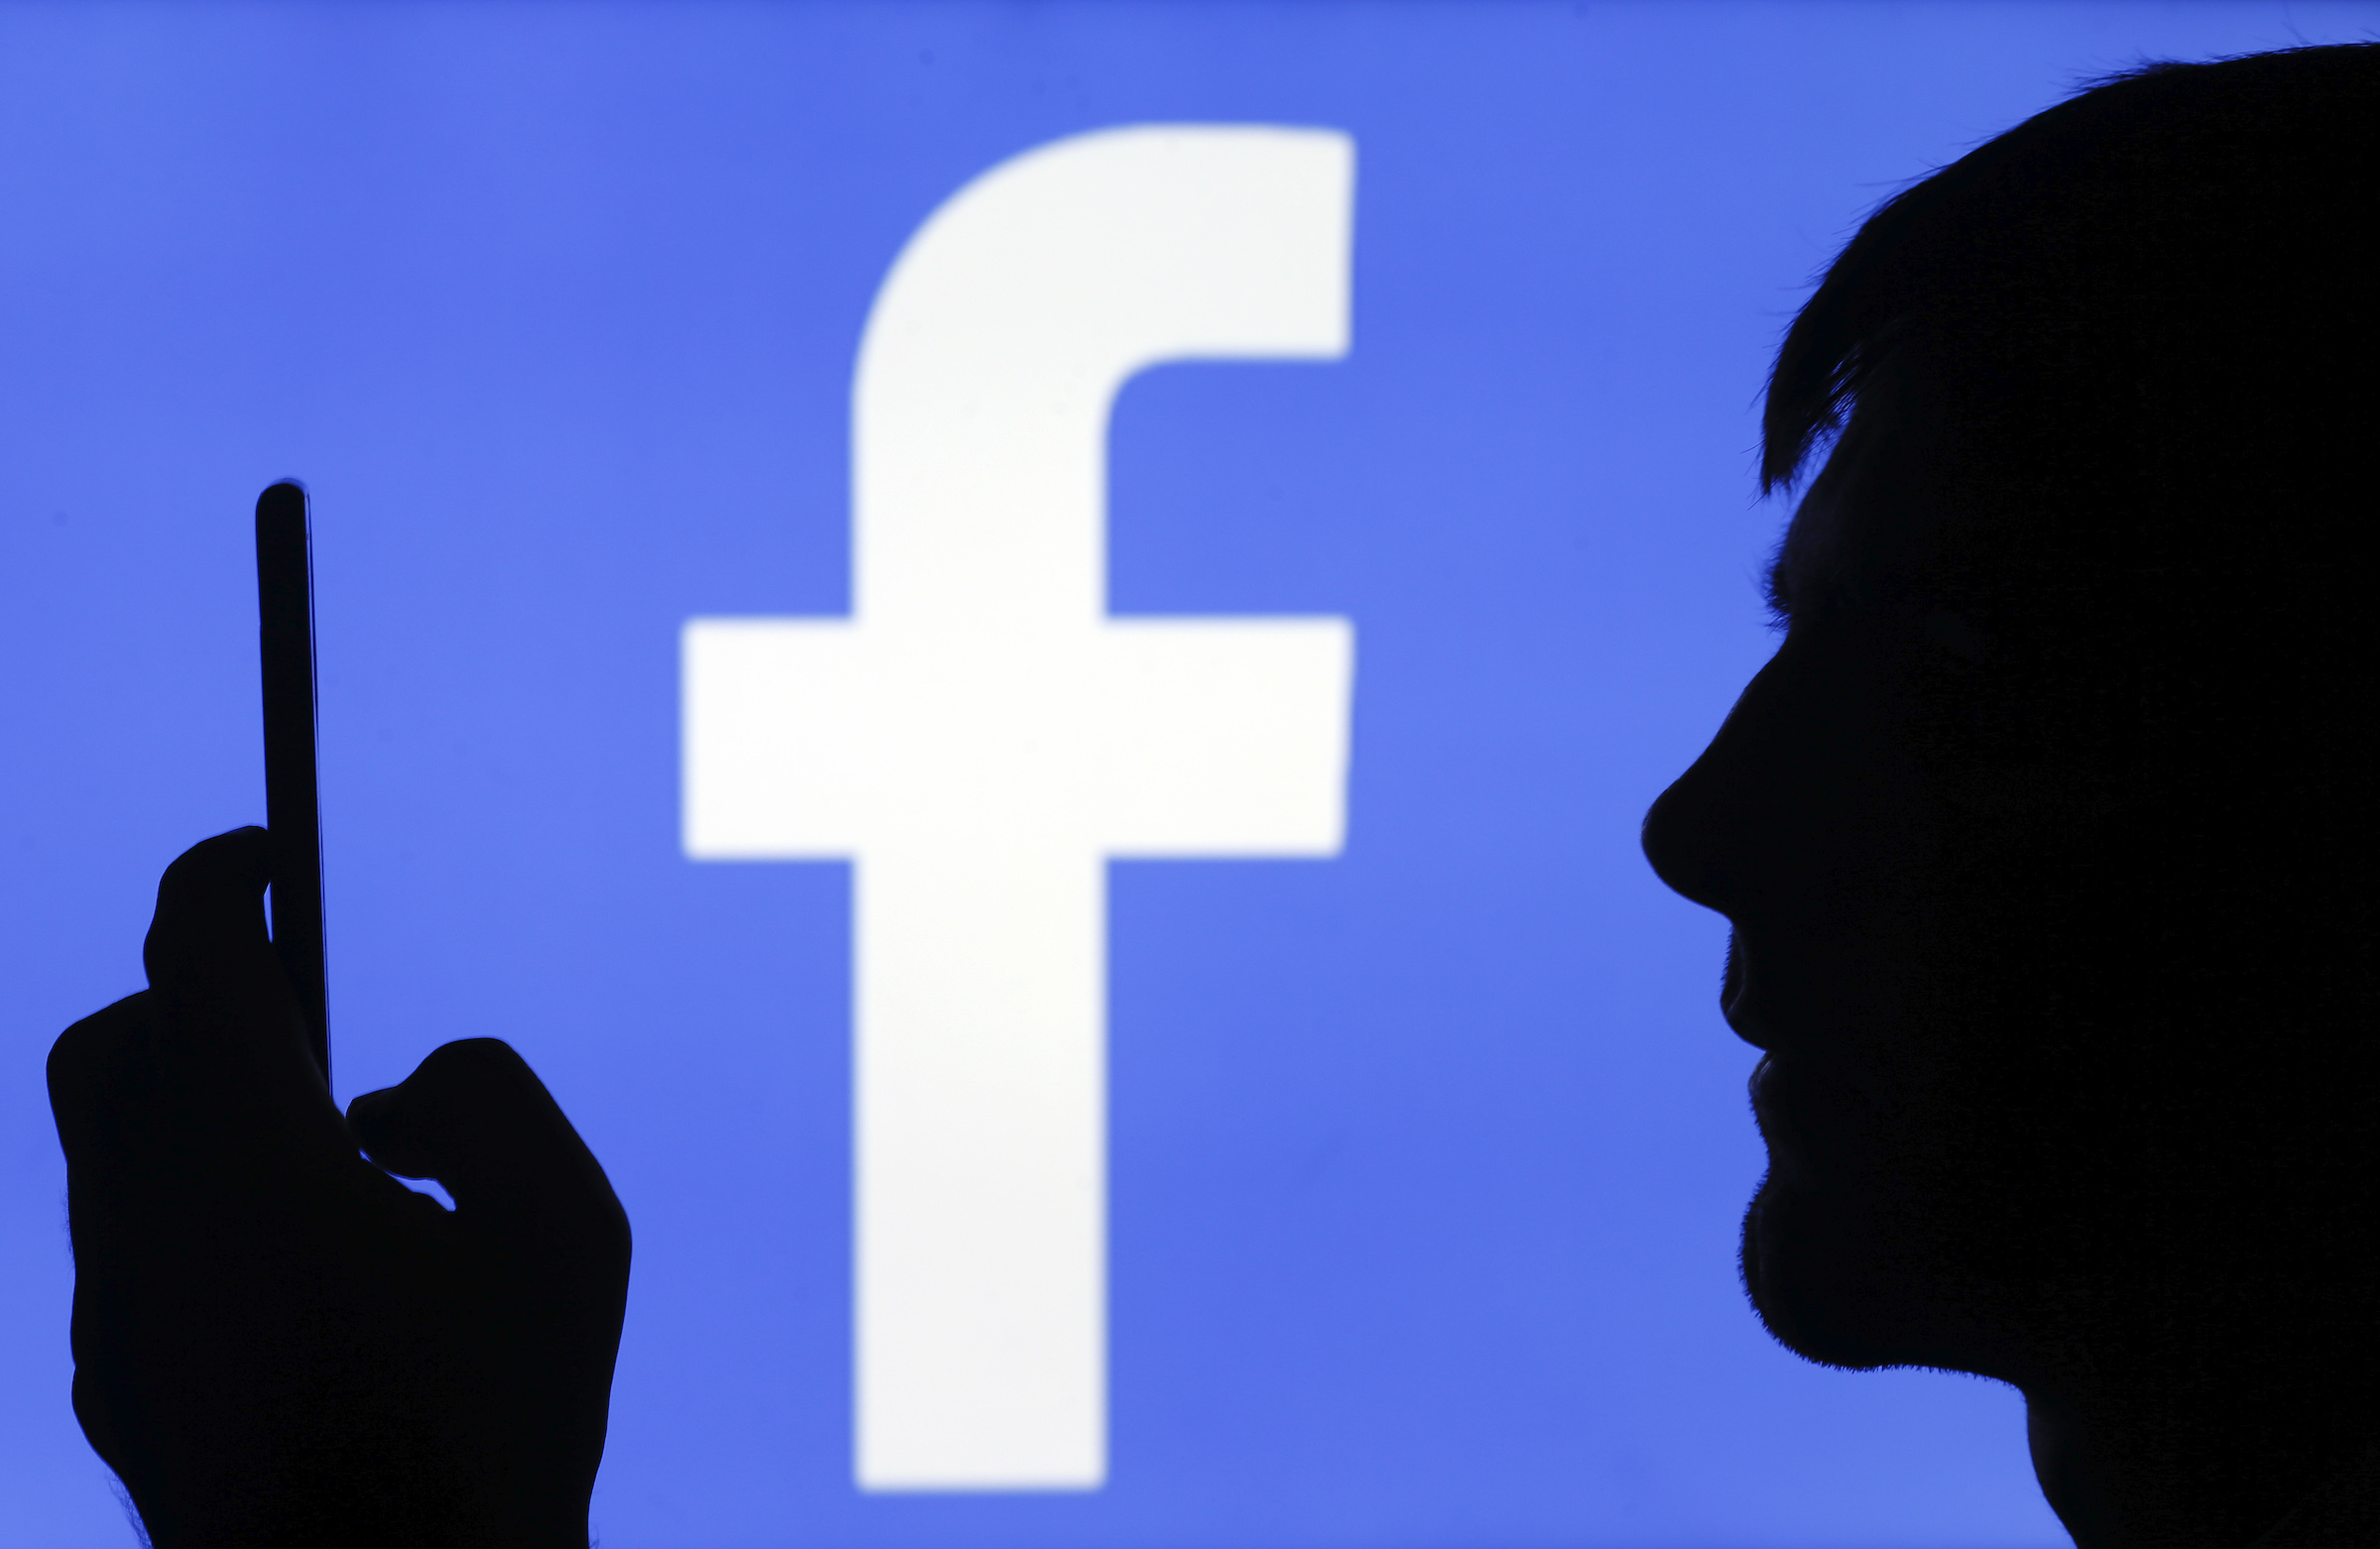 In this photo illustration, the Facebook logo is displayed on a TV screen on September 09, 2019 in Paris, France.